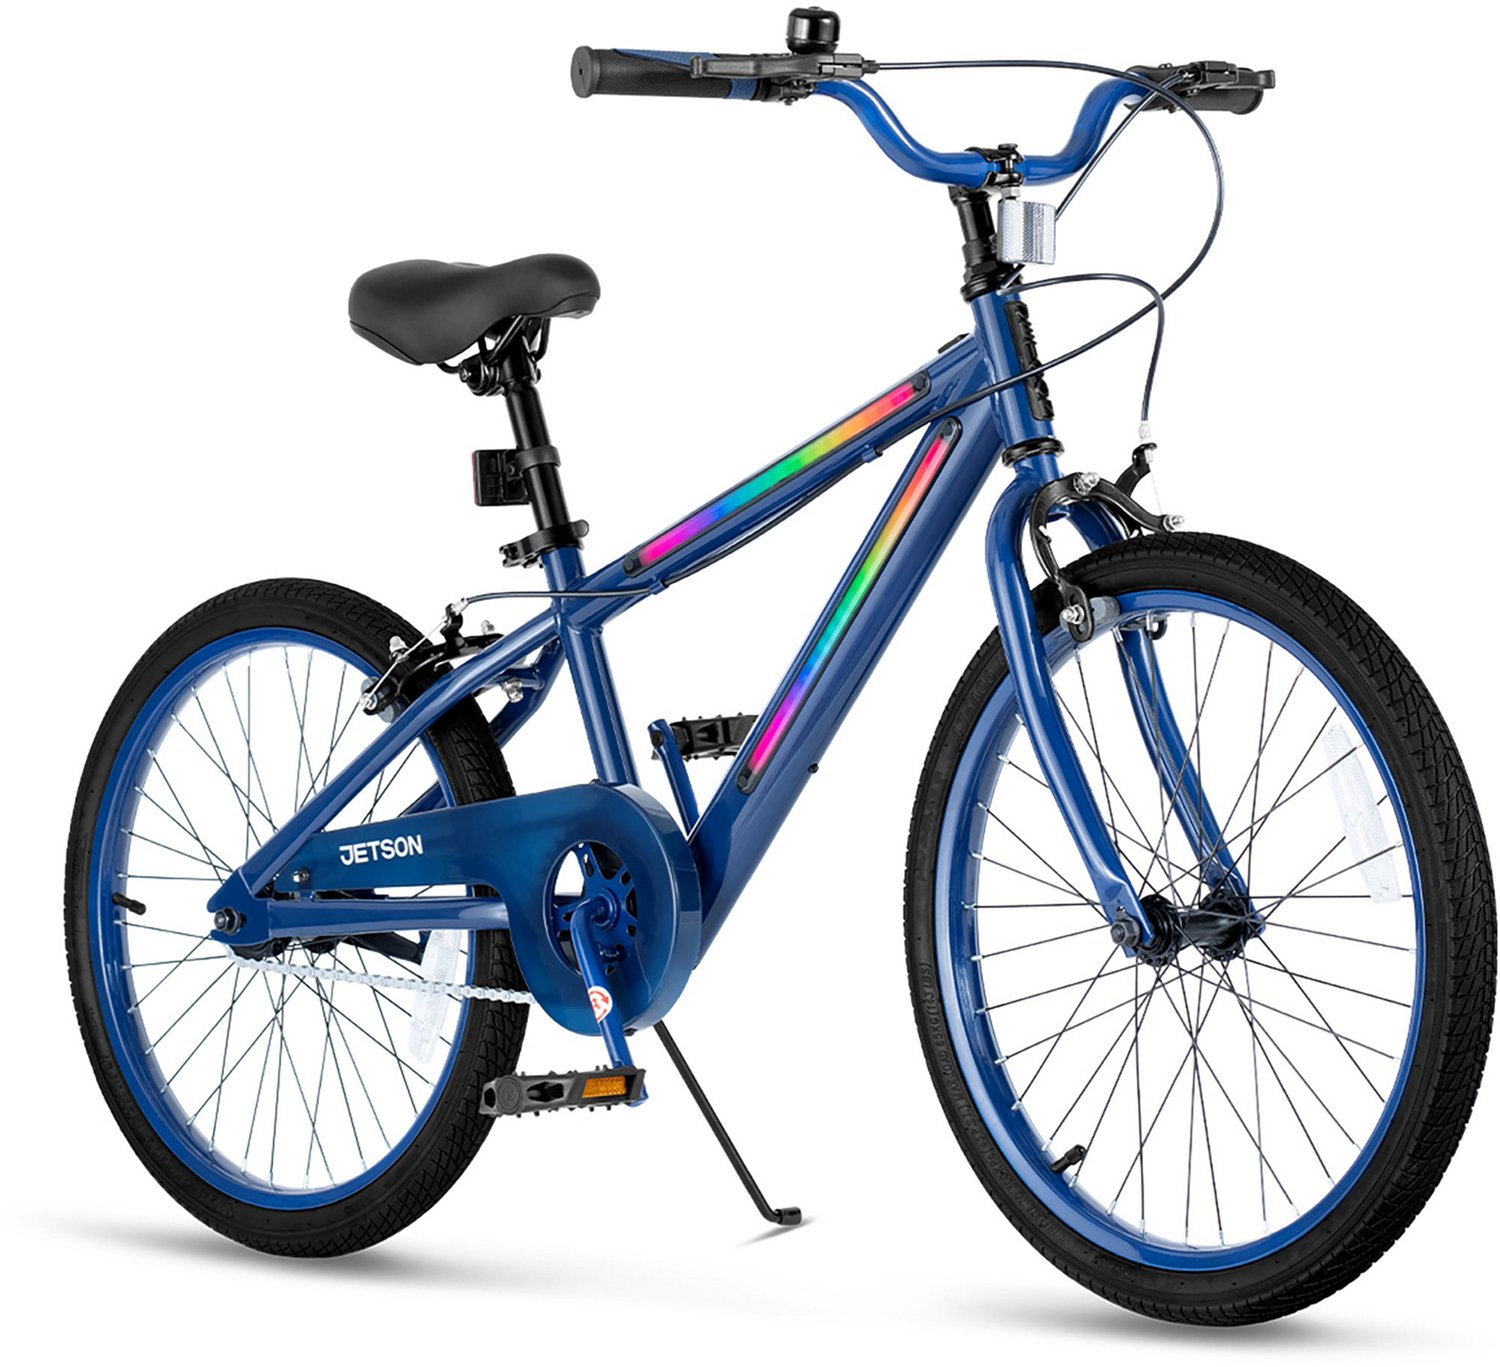 Sawyer Ultra Light Kids Bike Without Pedals 2 3 4 5 Years (Blue) :  : Sports & Outdoors